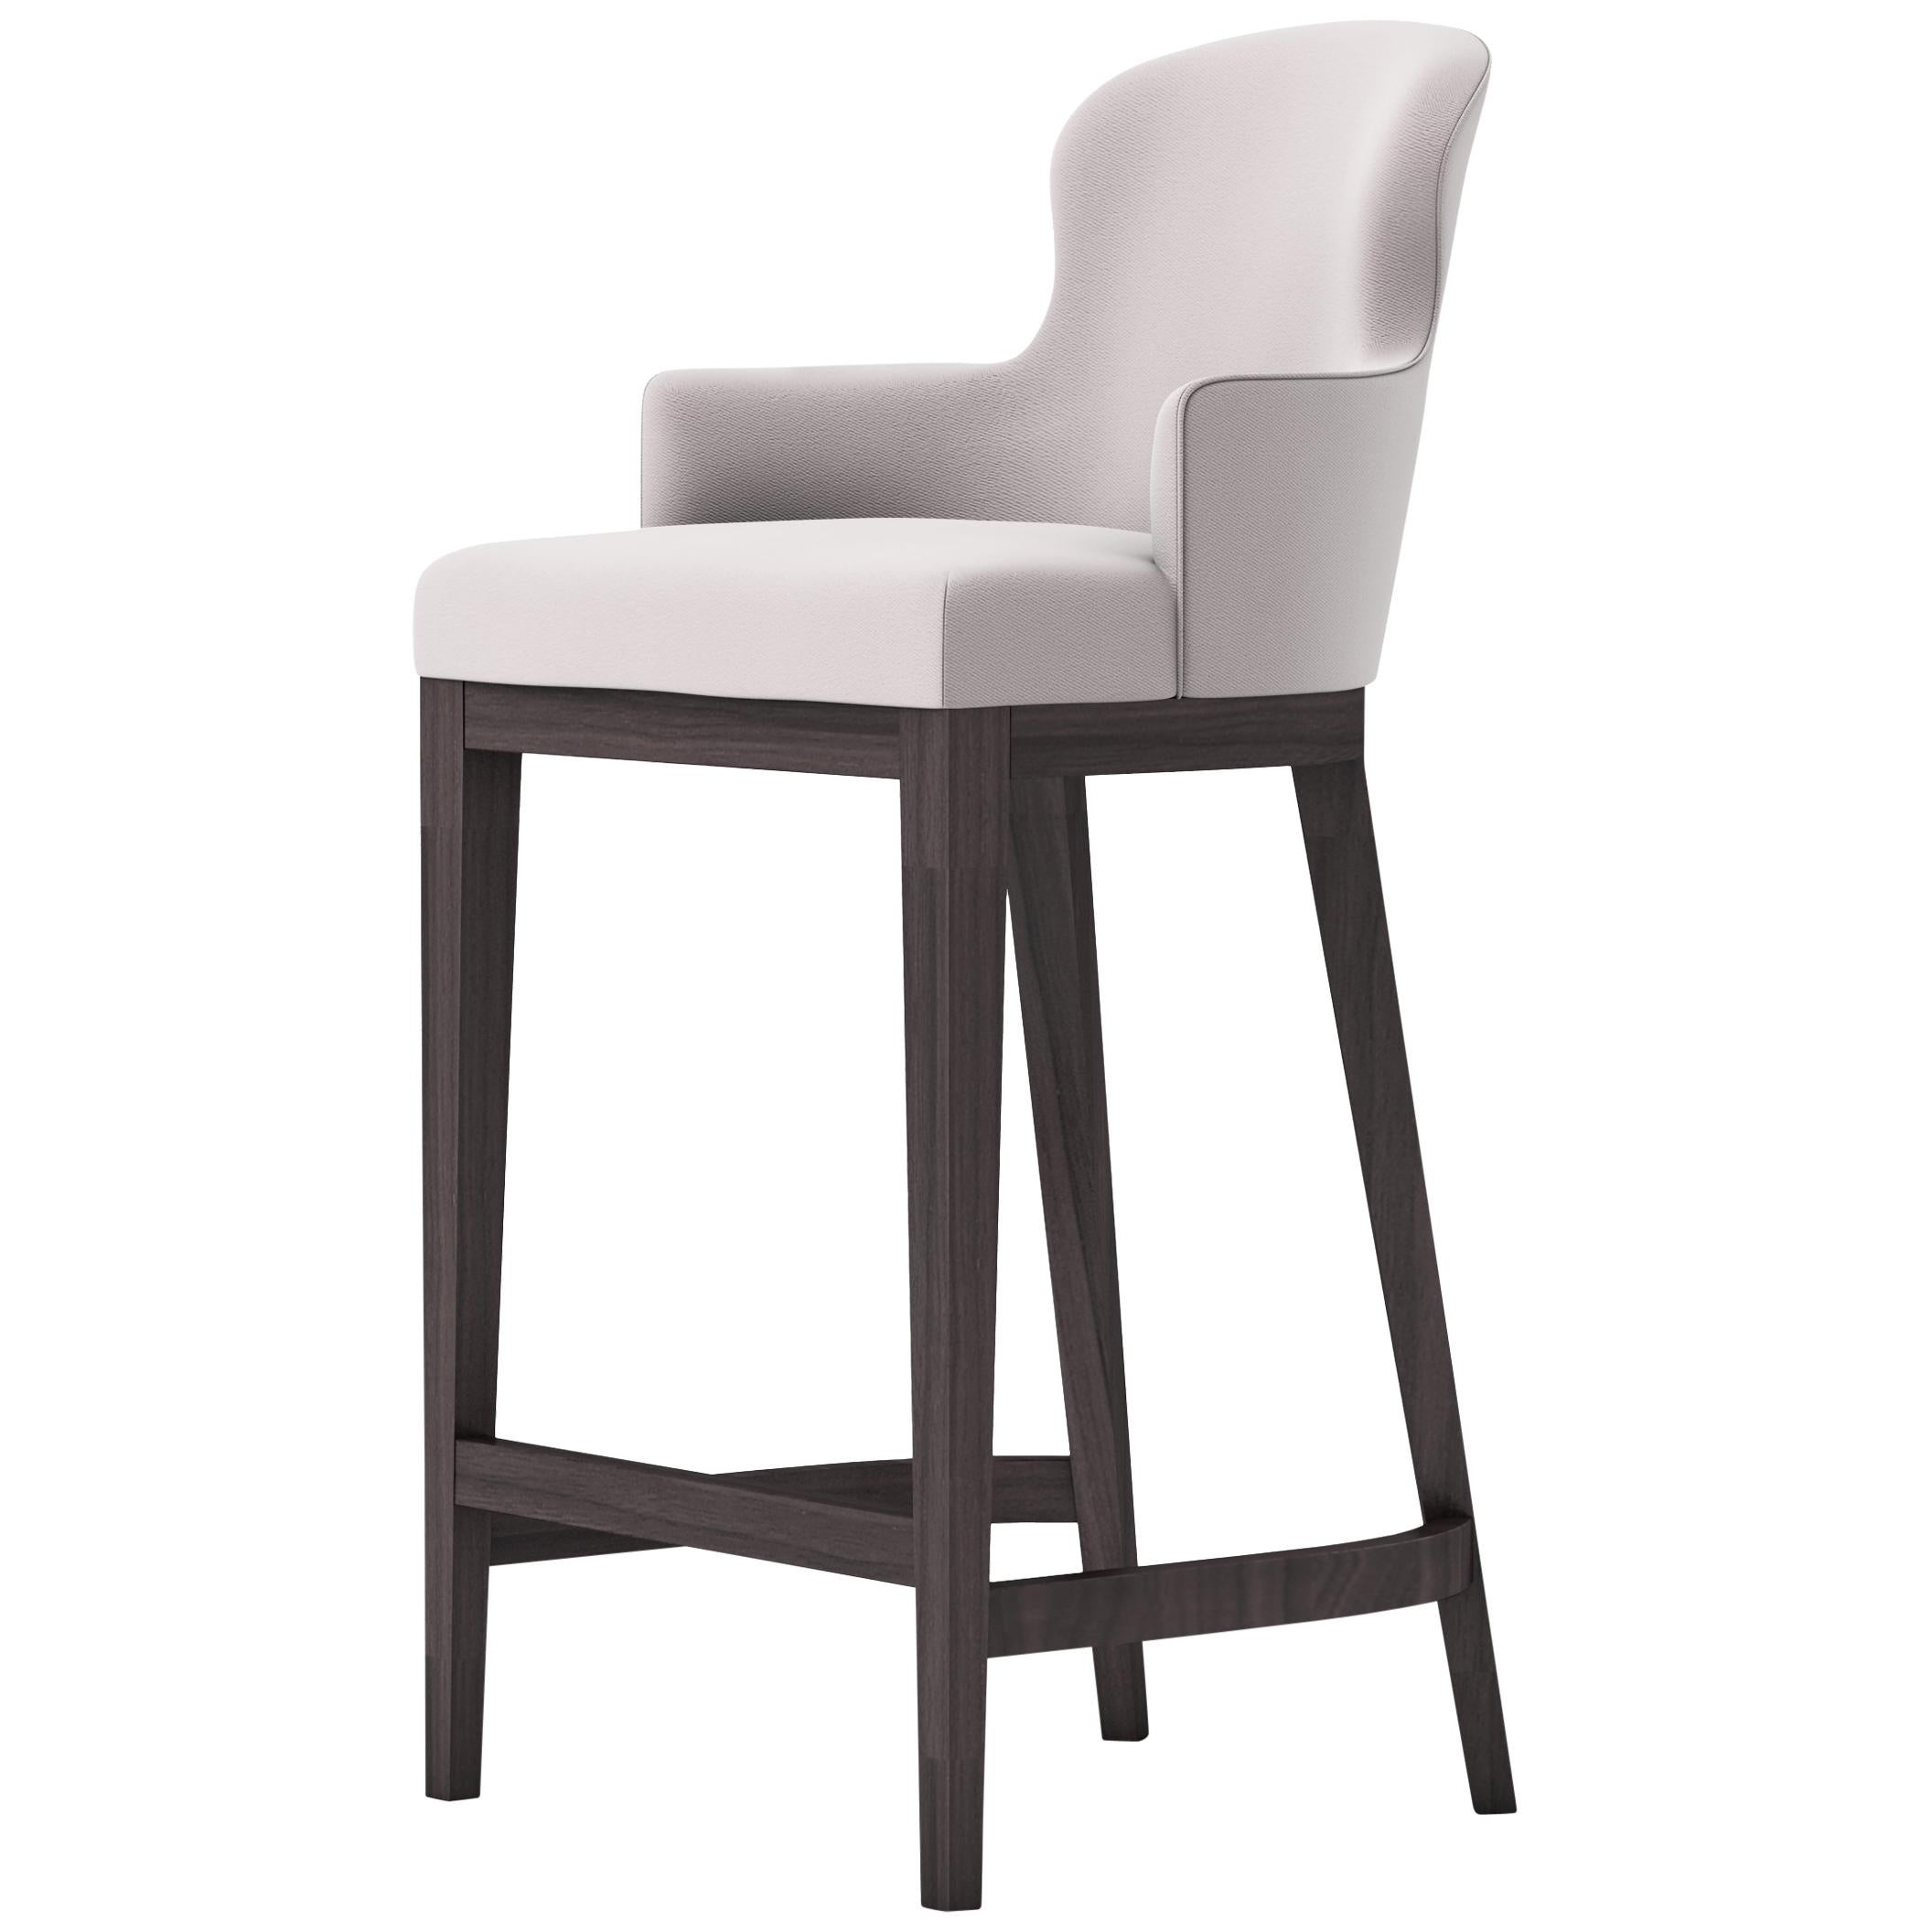 Outdoor Sammarco Bar Stool by Coco Wolf For Sale